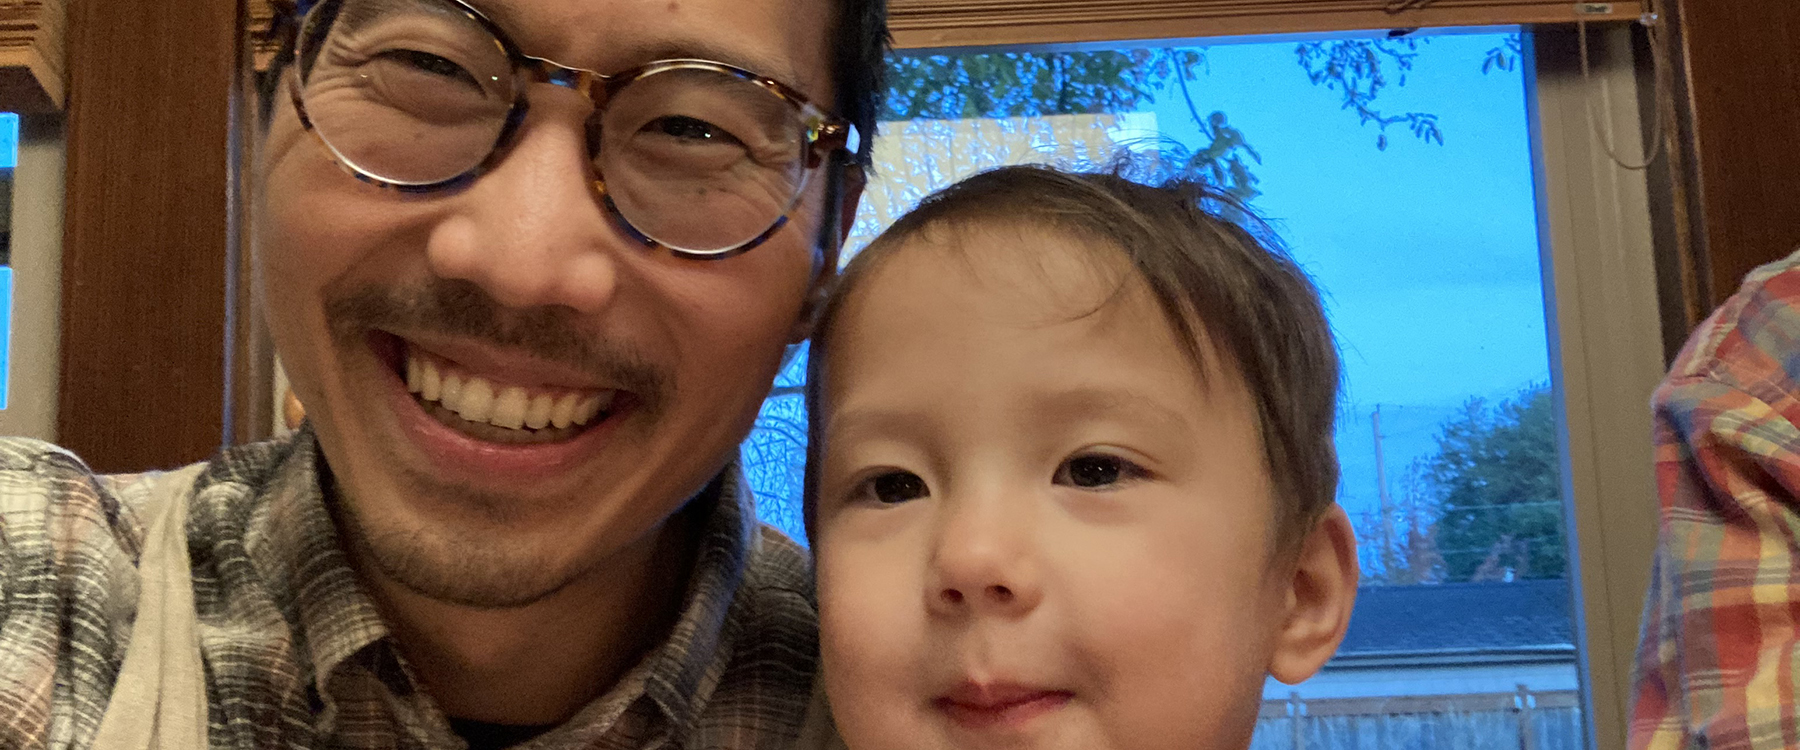 Brian Park and his child, Miles